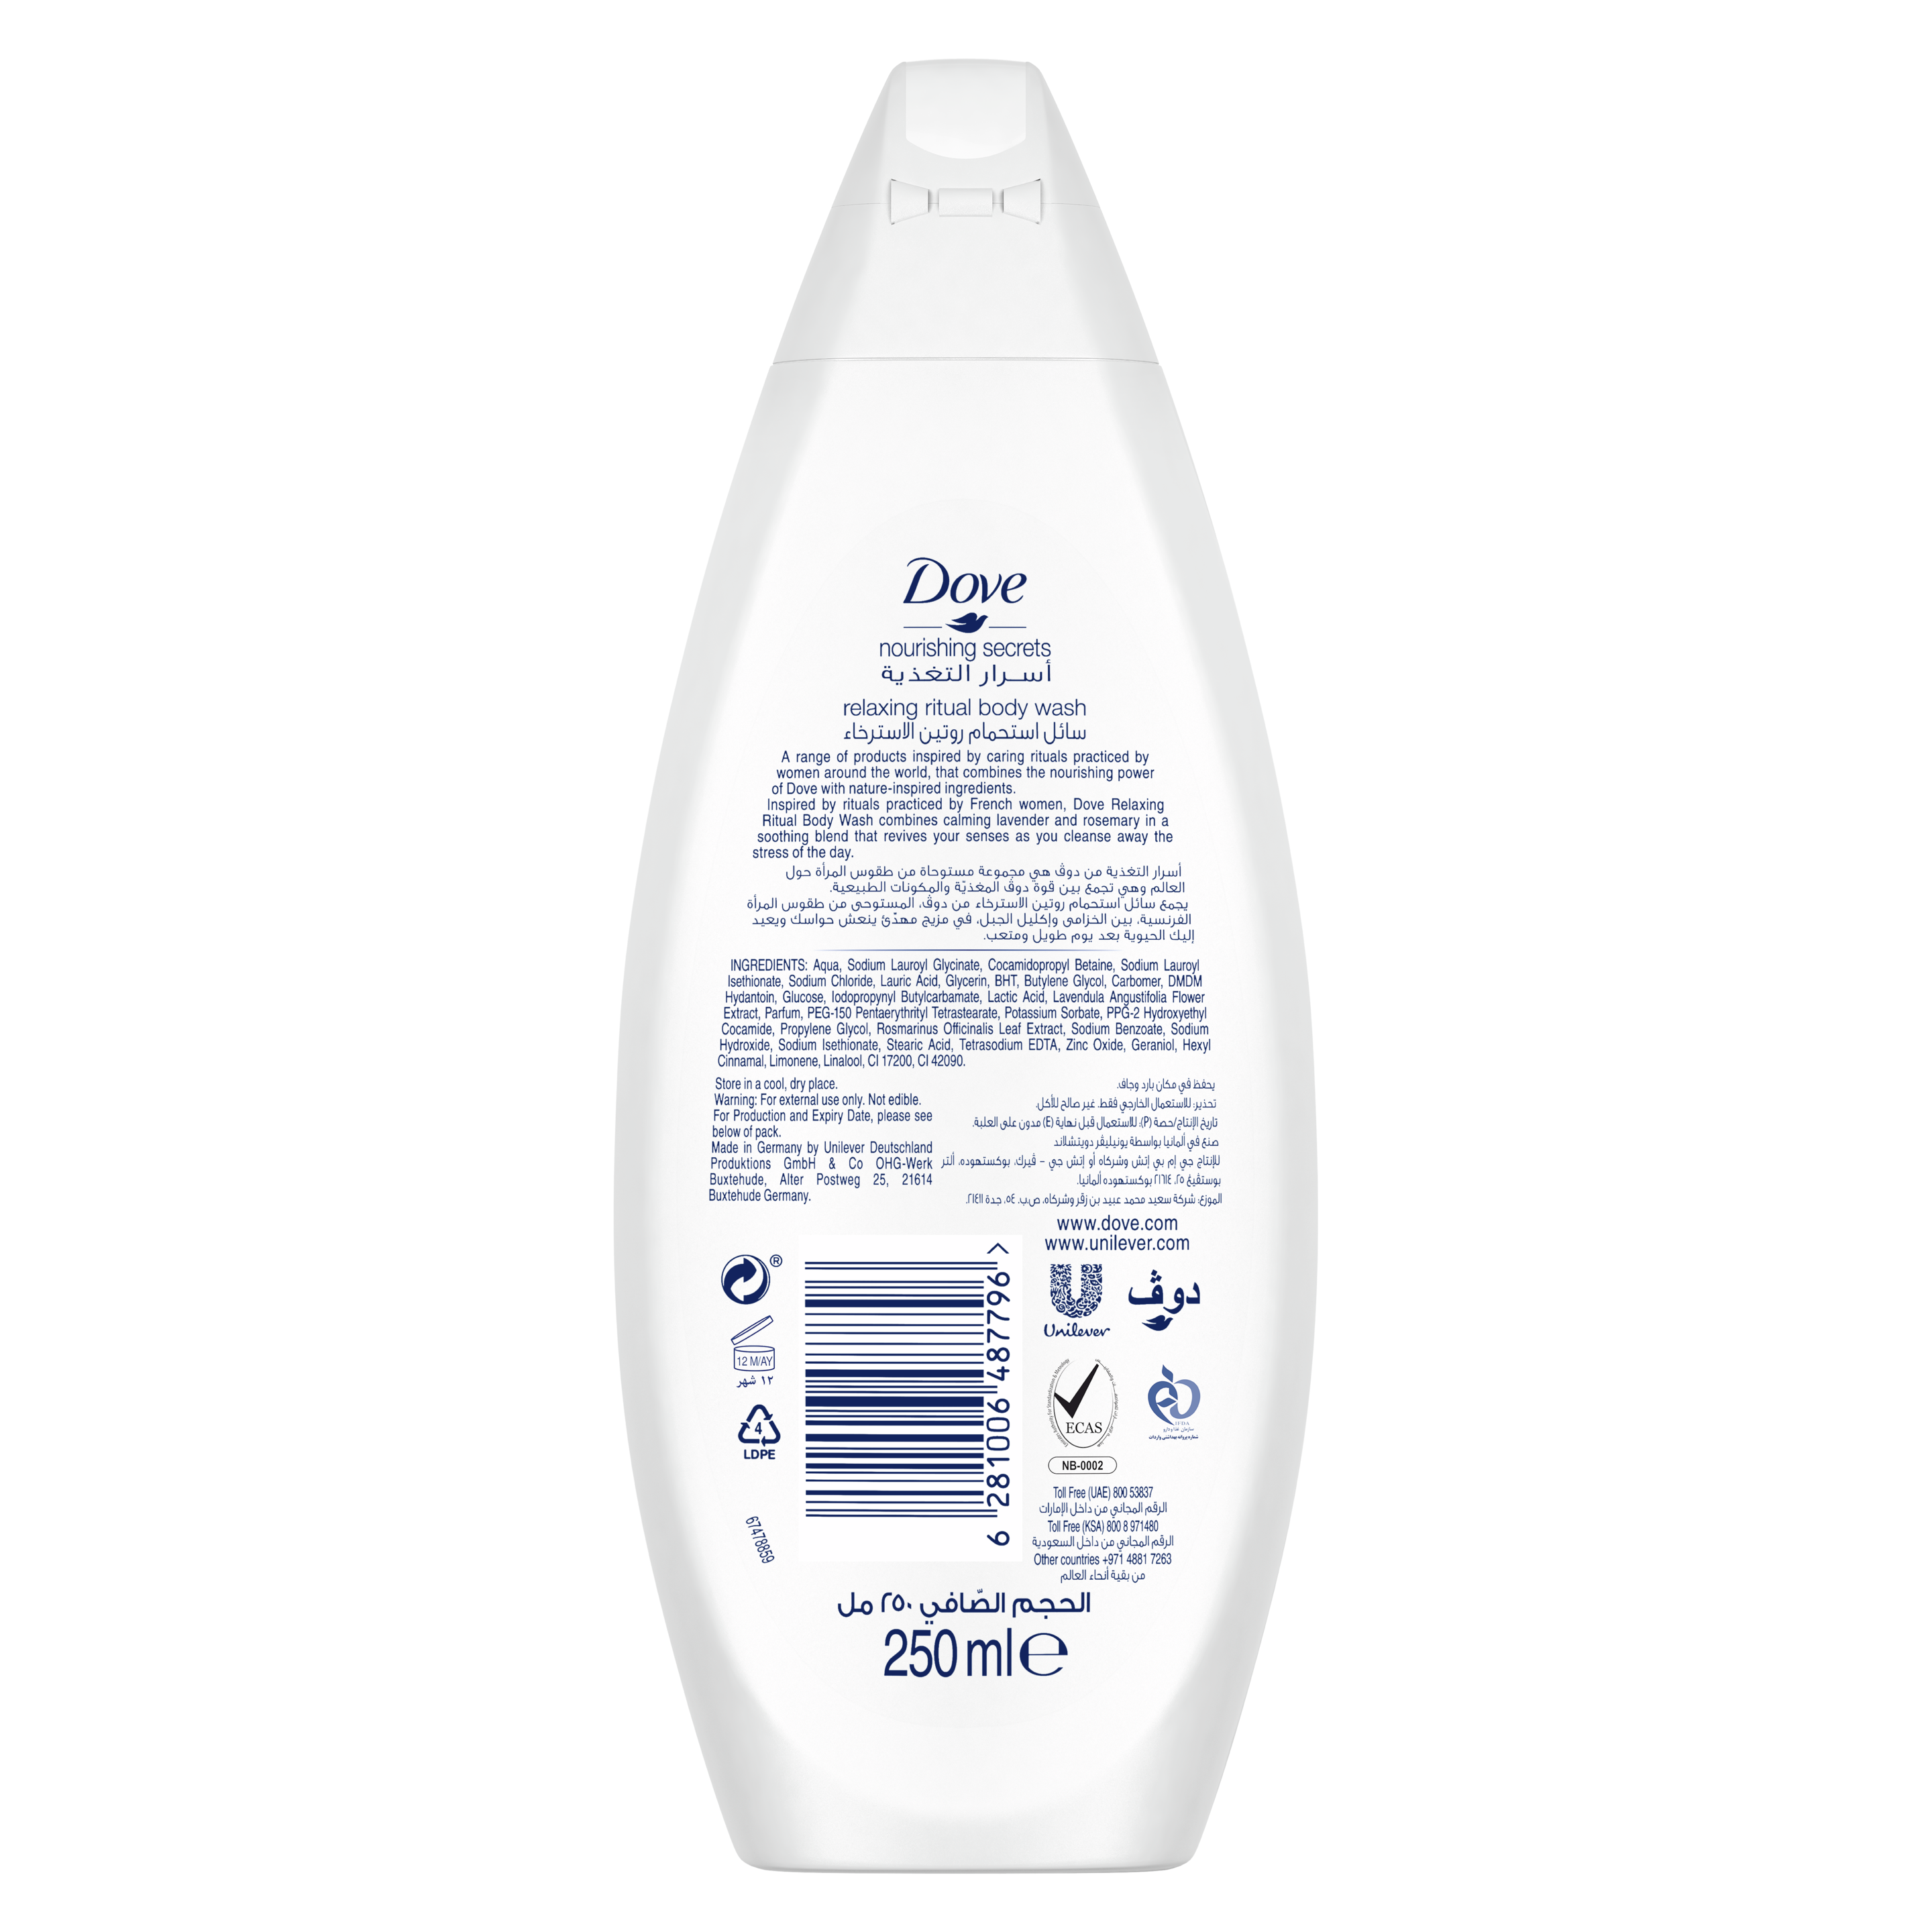 Dove Relaxing Ritual Body Wash - Lavender Oil and Rosemary Extract